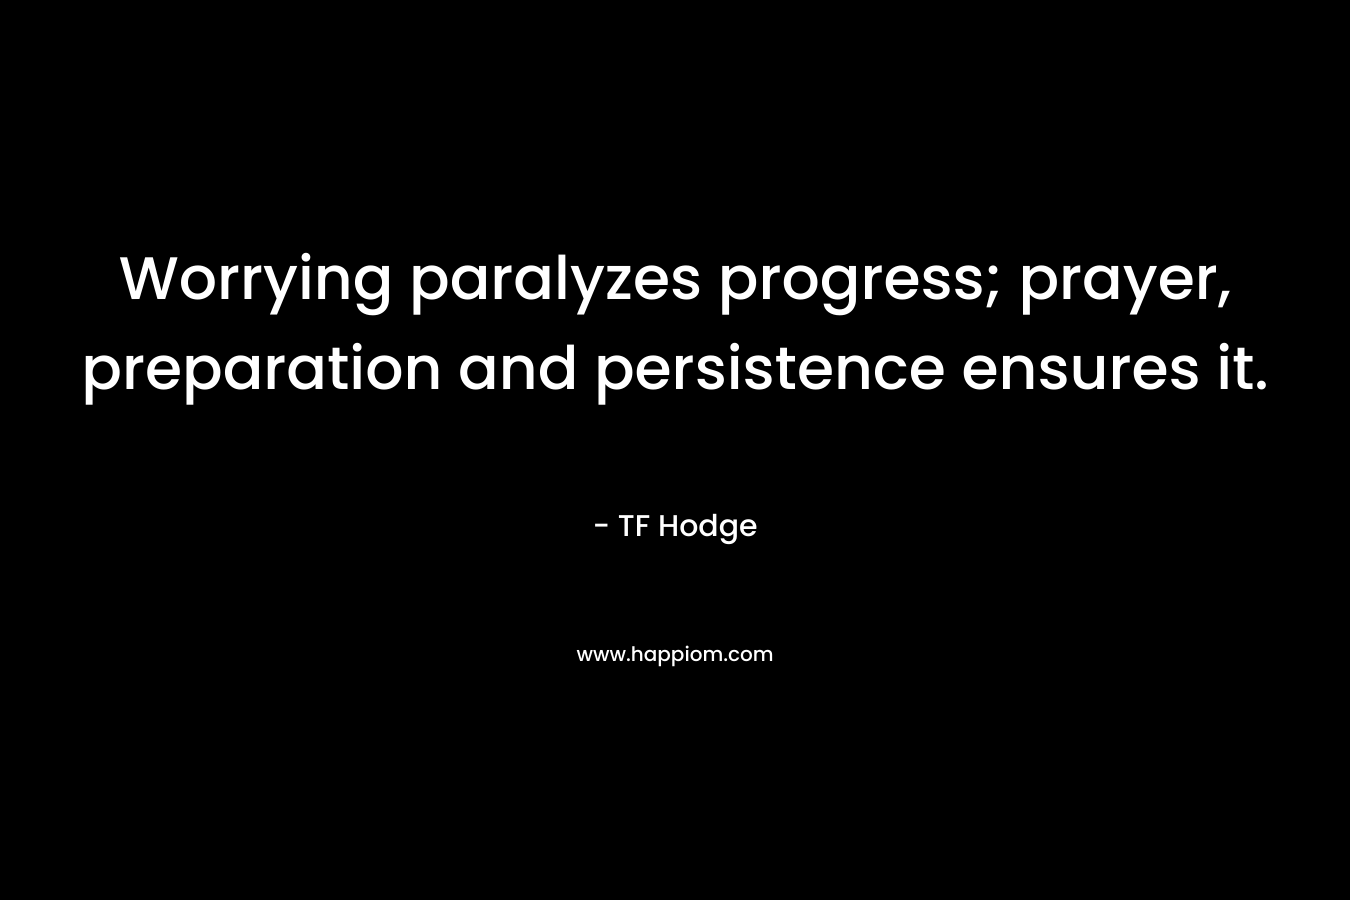 Worrying paralyzes progress; prayer, preparation and persistence ensures it.